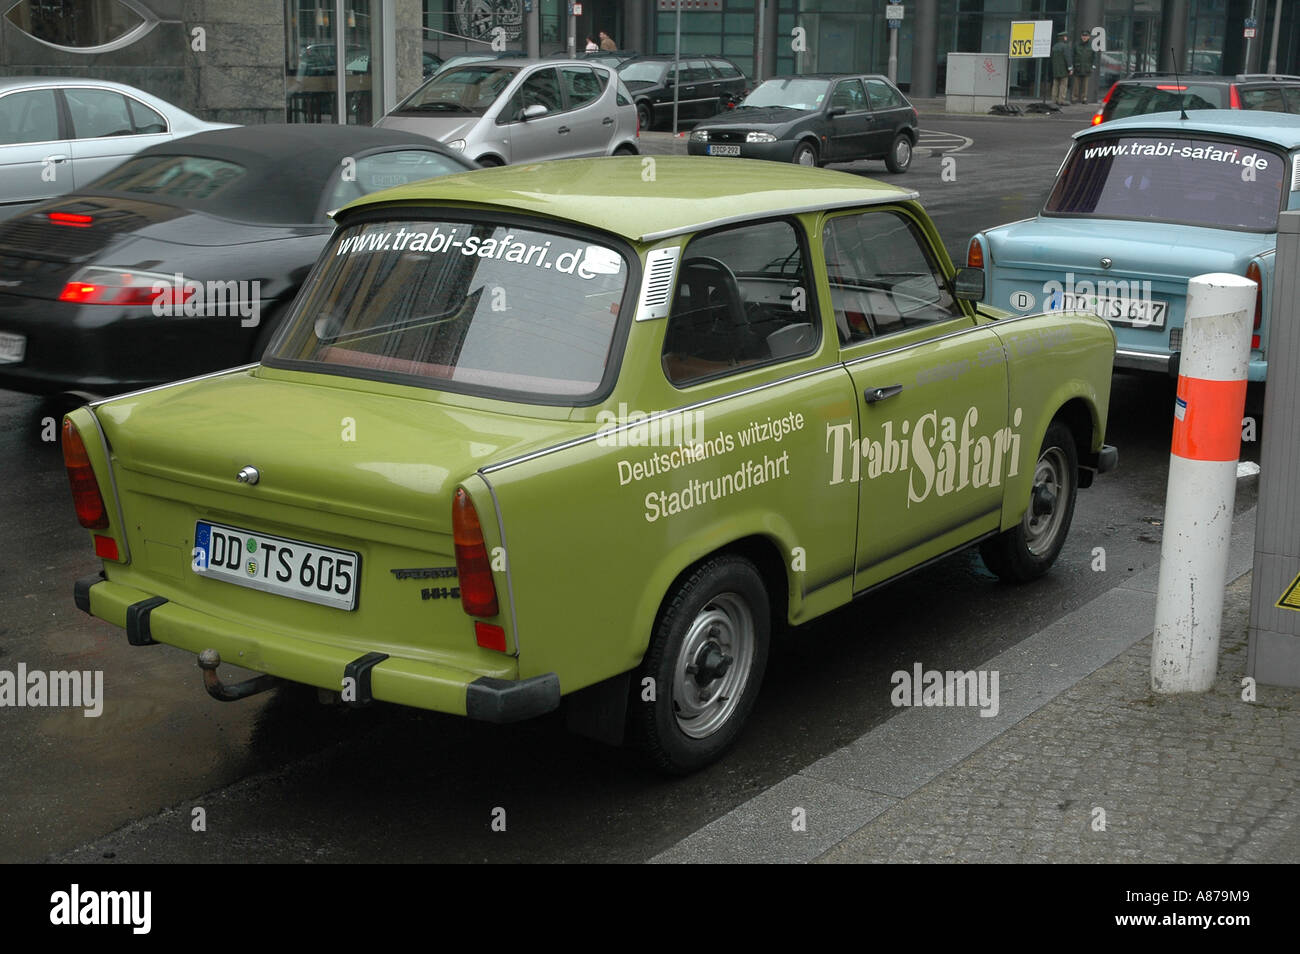 Trabant Car for hire. Trips around former East Berlin Germany Stock Photo